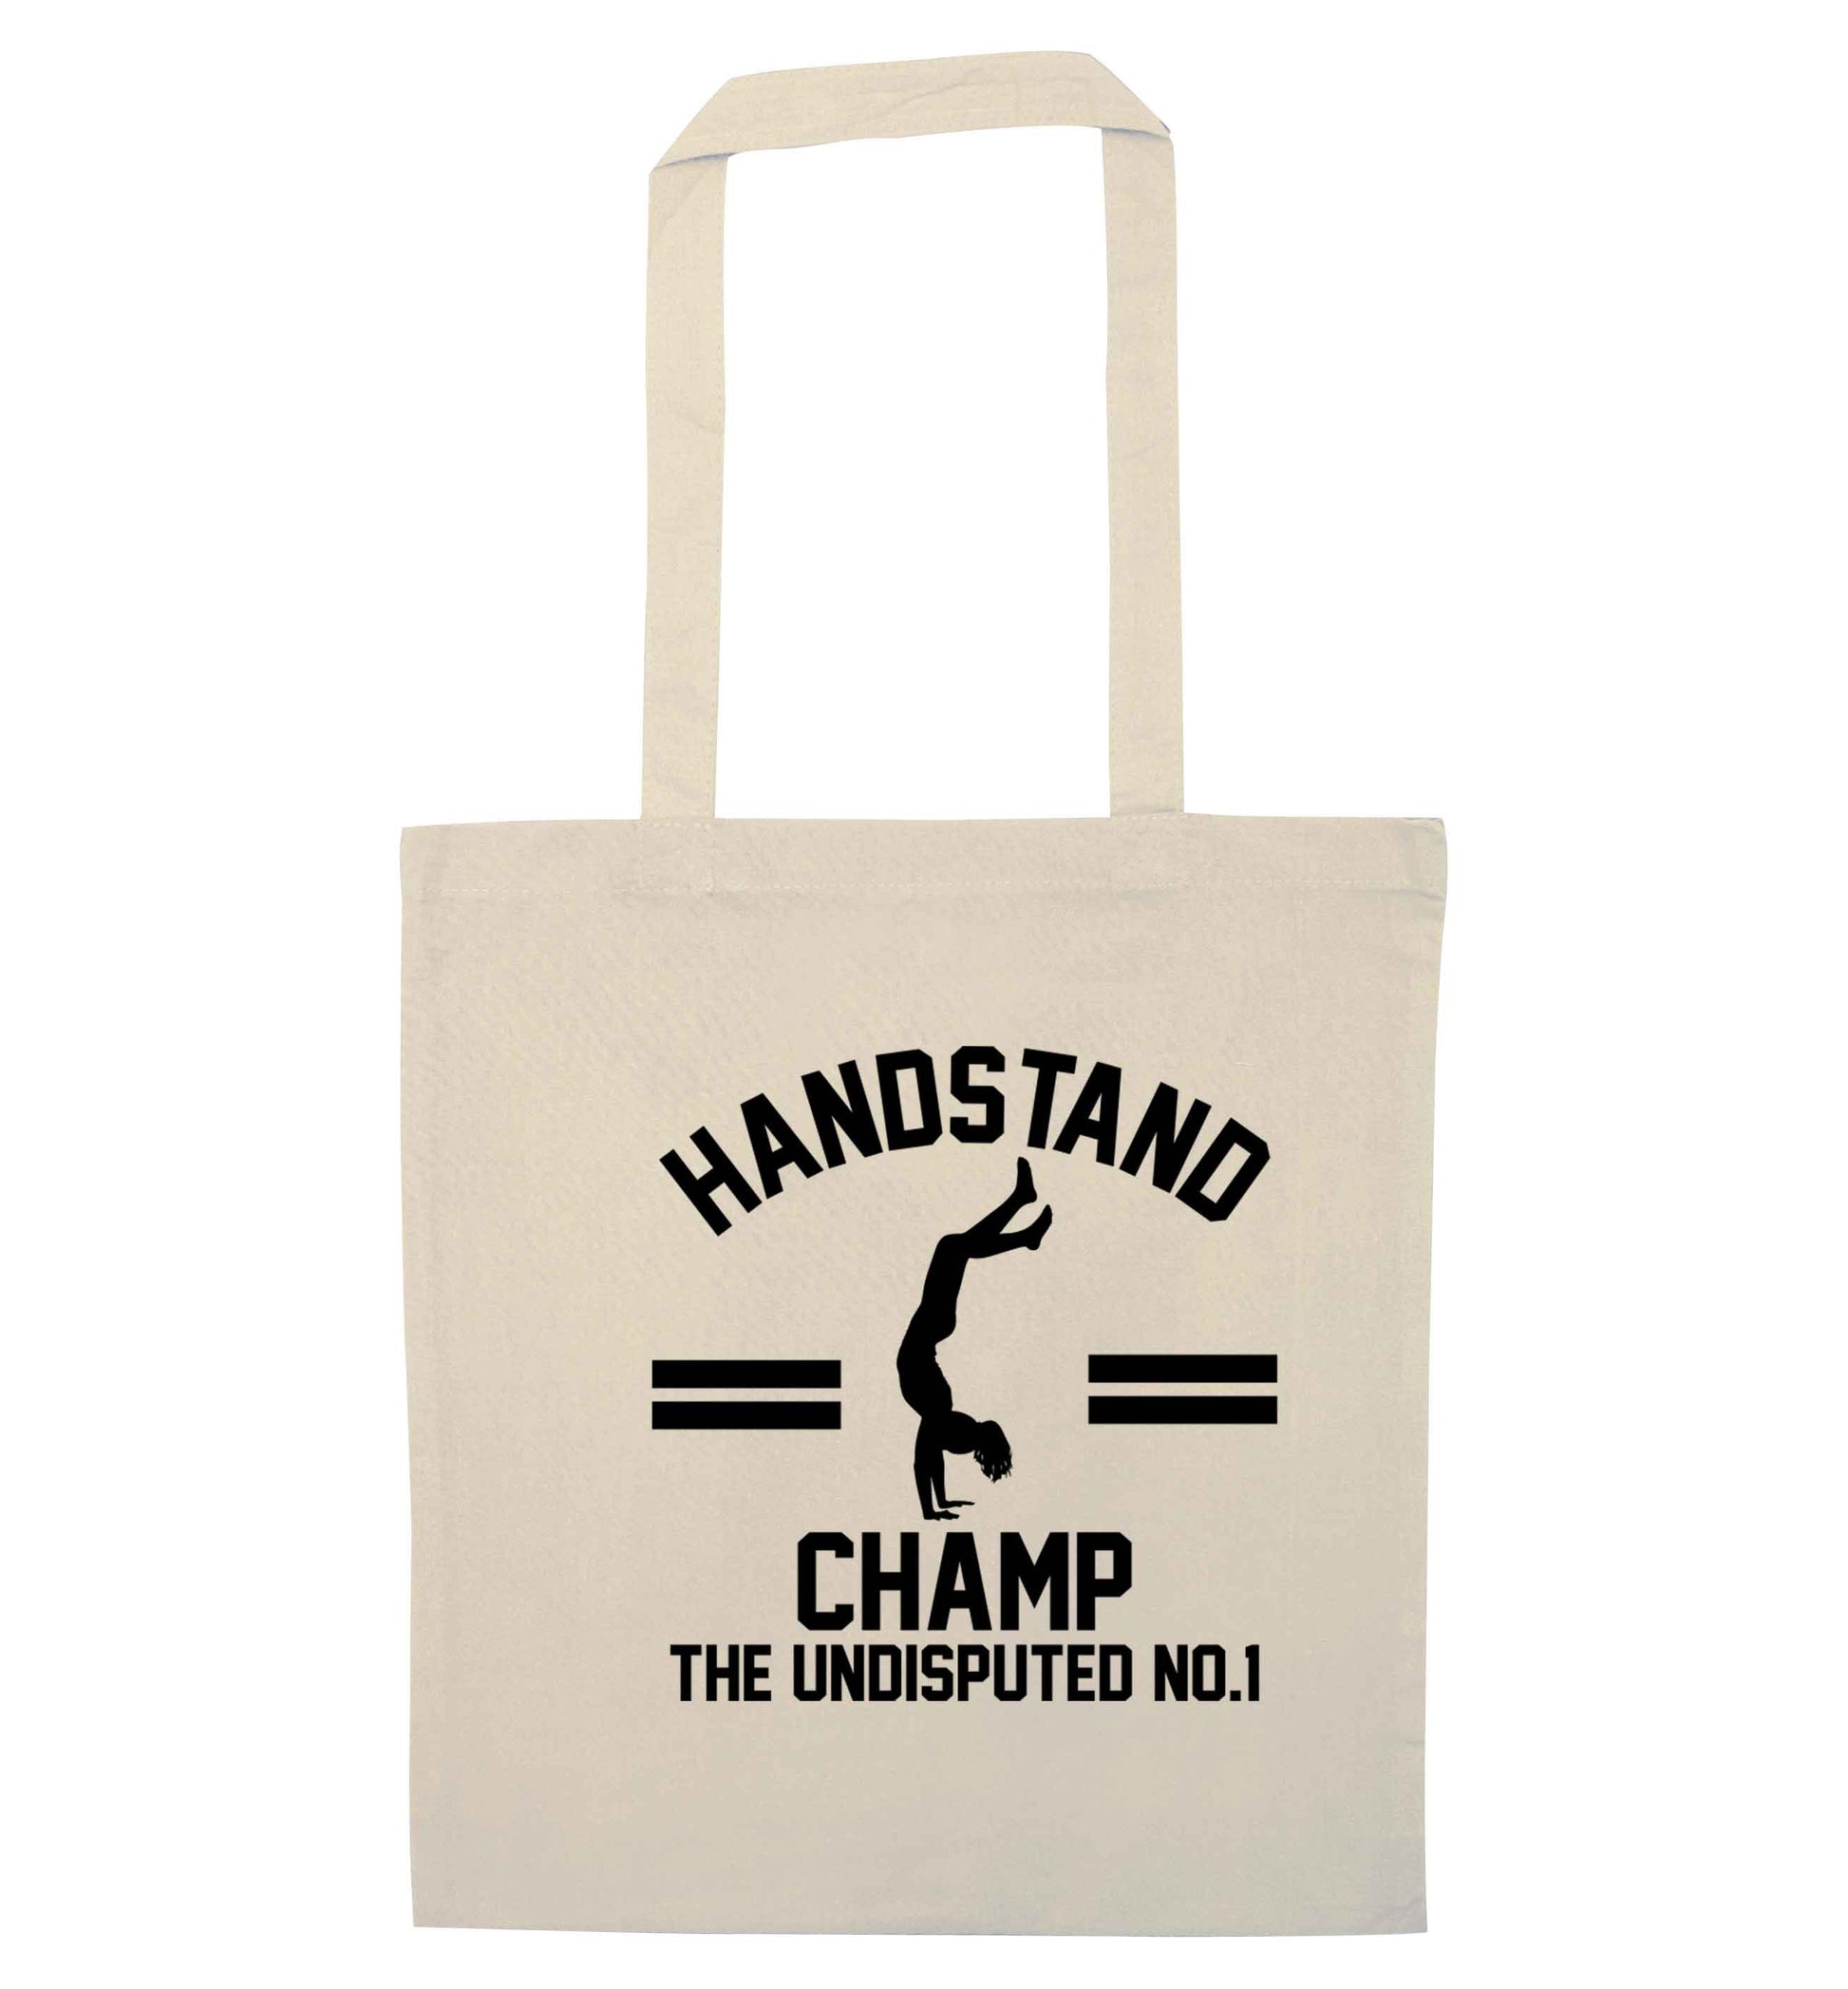 Undisputed handstand championship no.1  natural tote bag